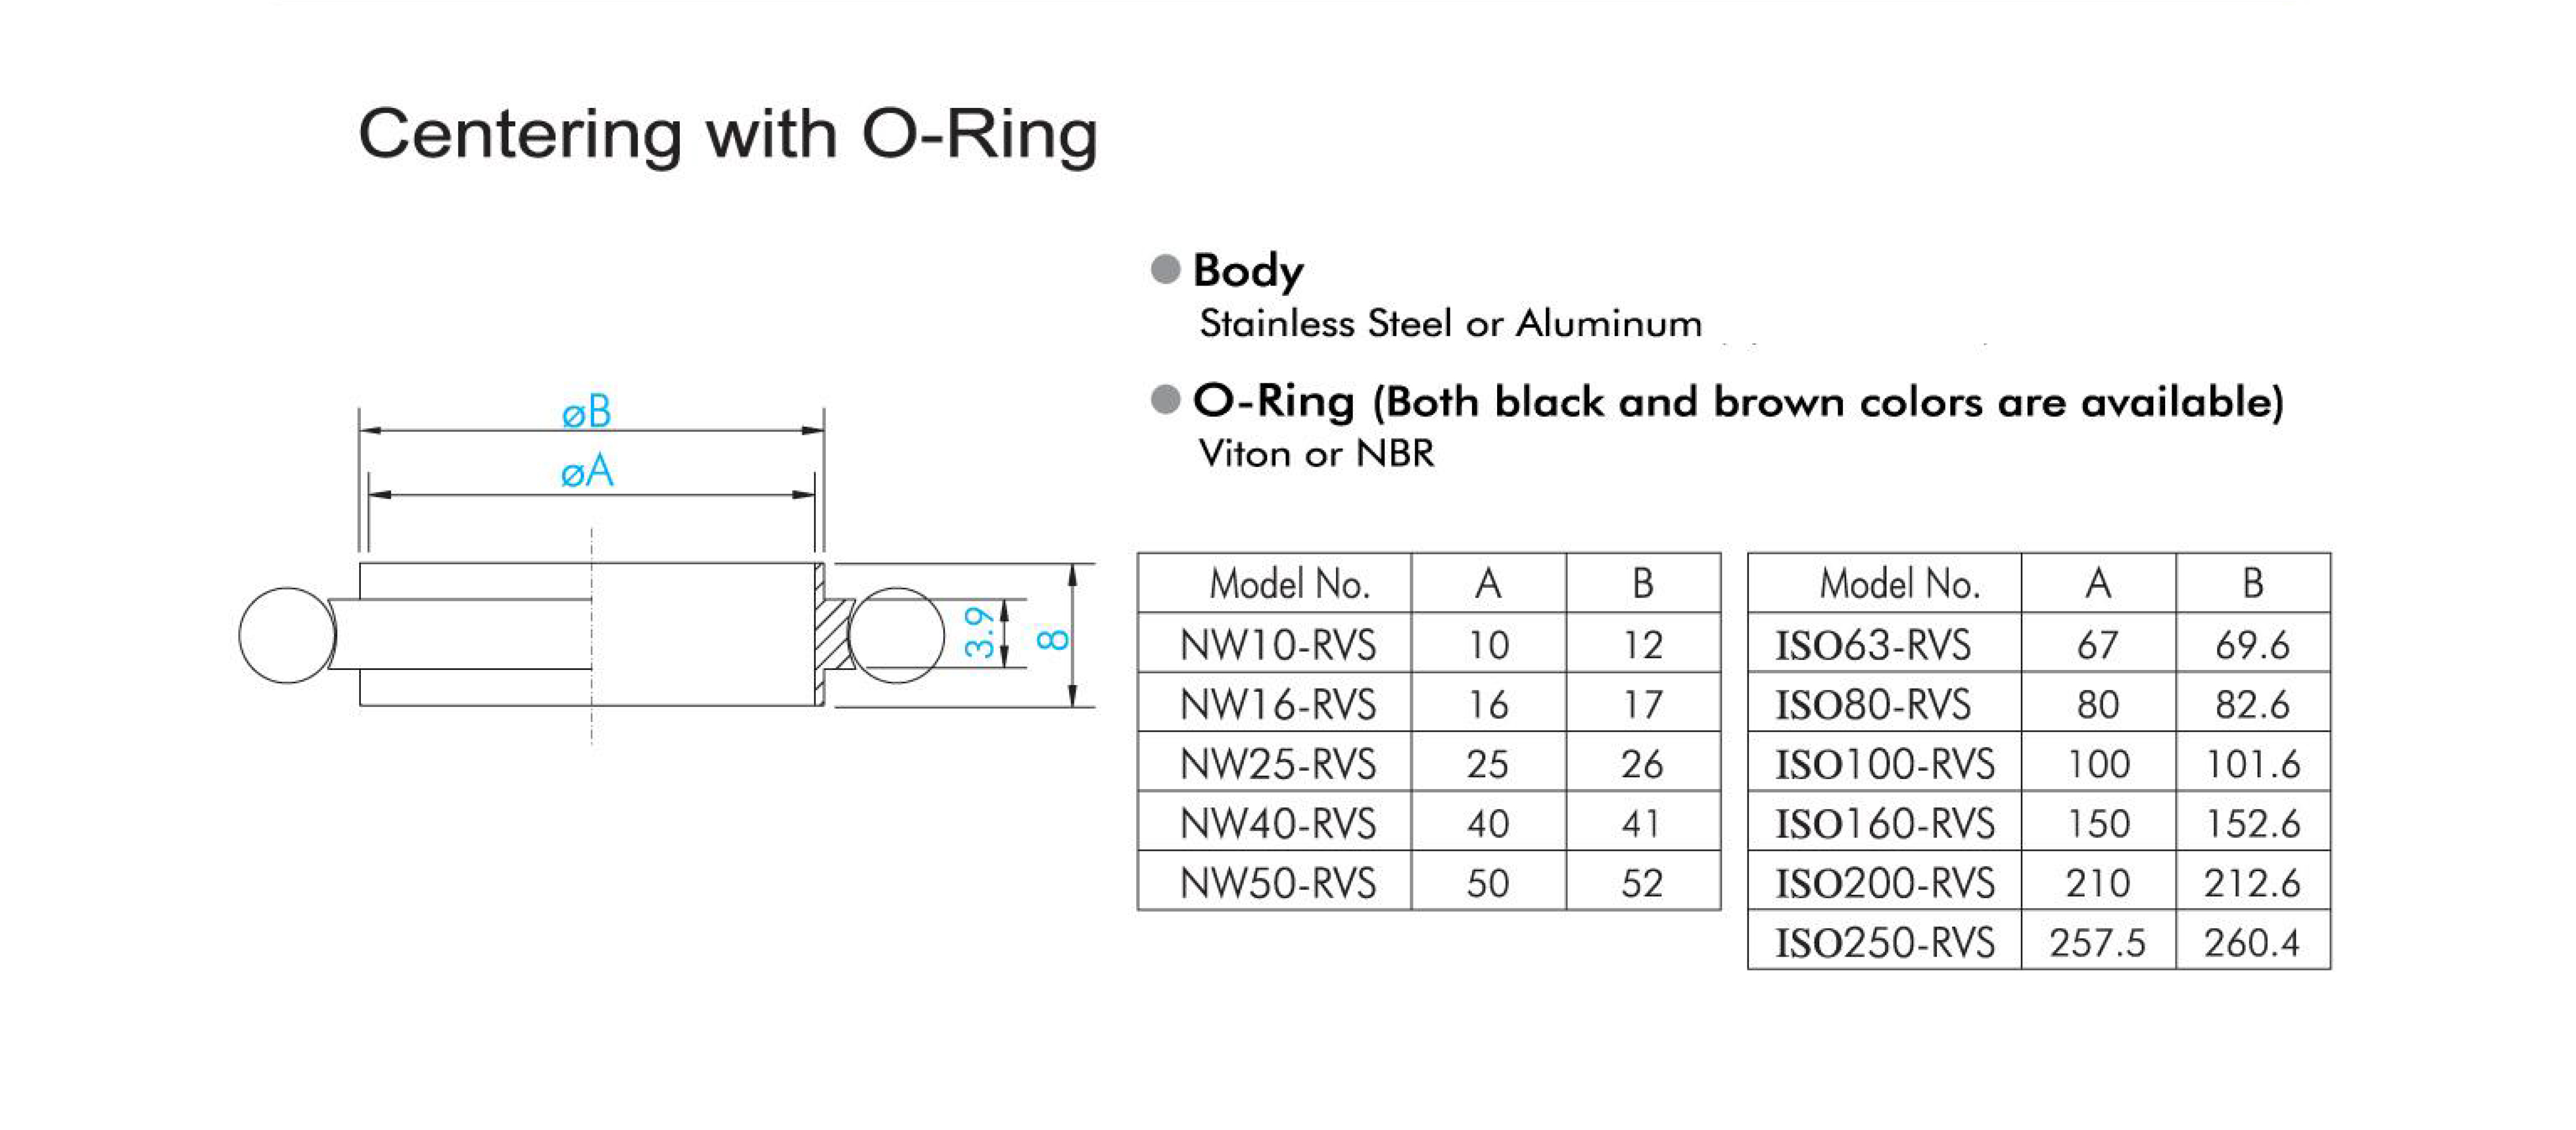 ESTPEN KF NW 16 Centering Ring Aluminum with Viton O-Ring 10 Pcs Pack